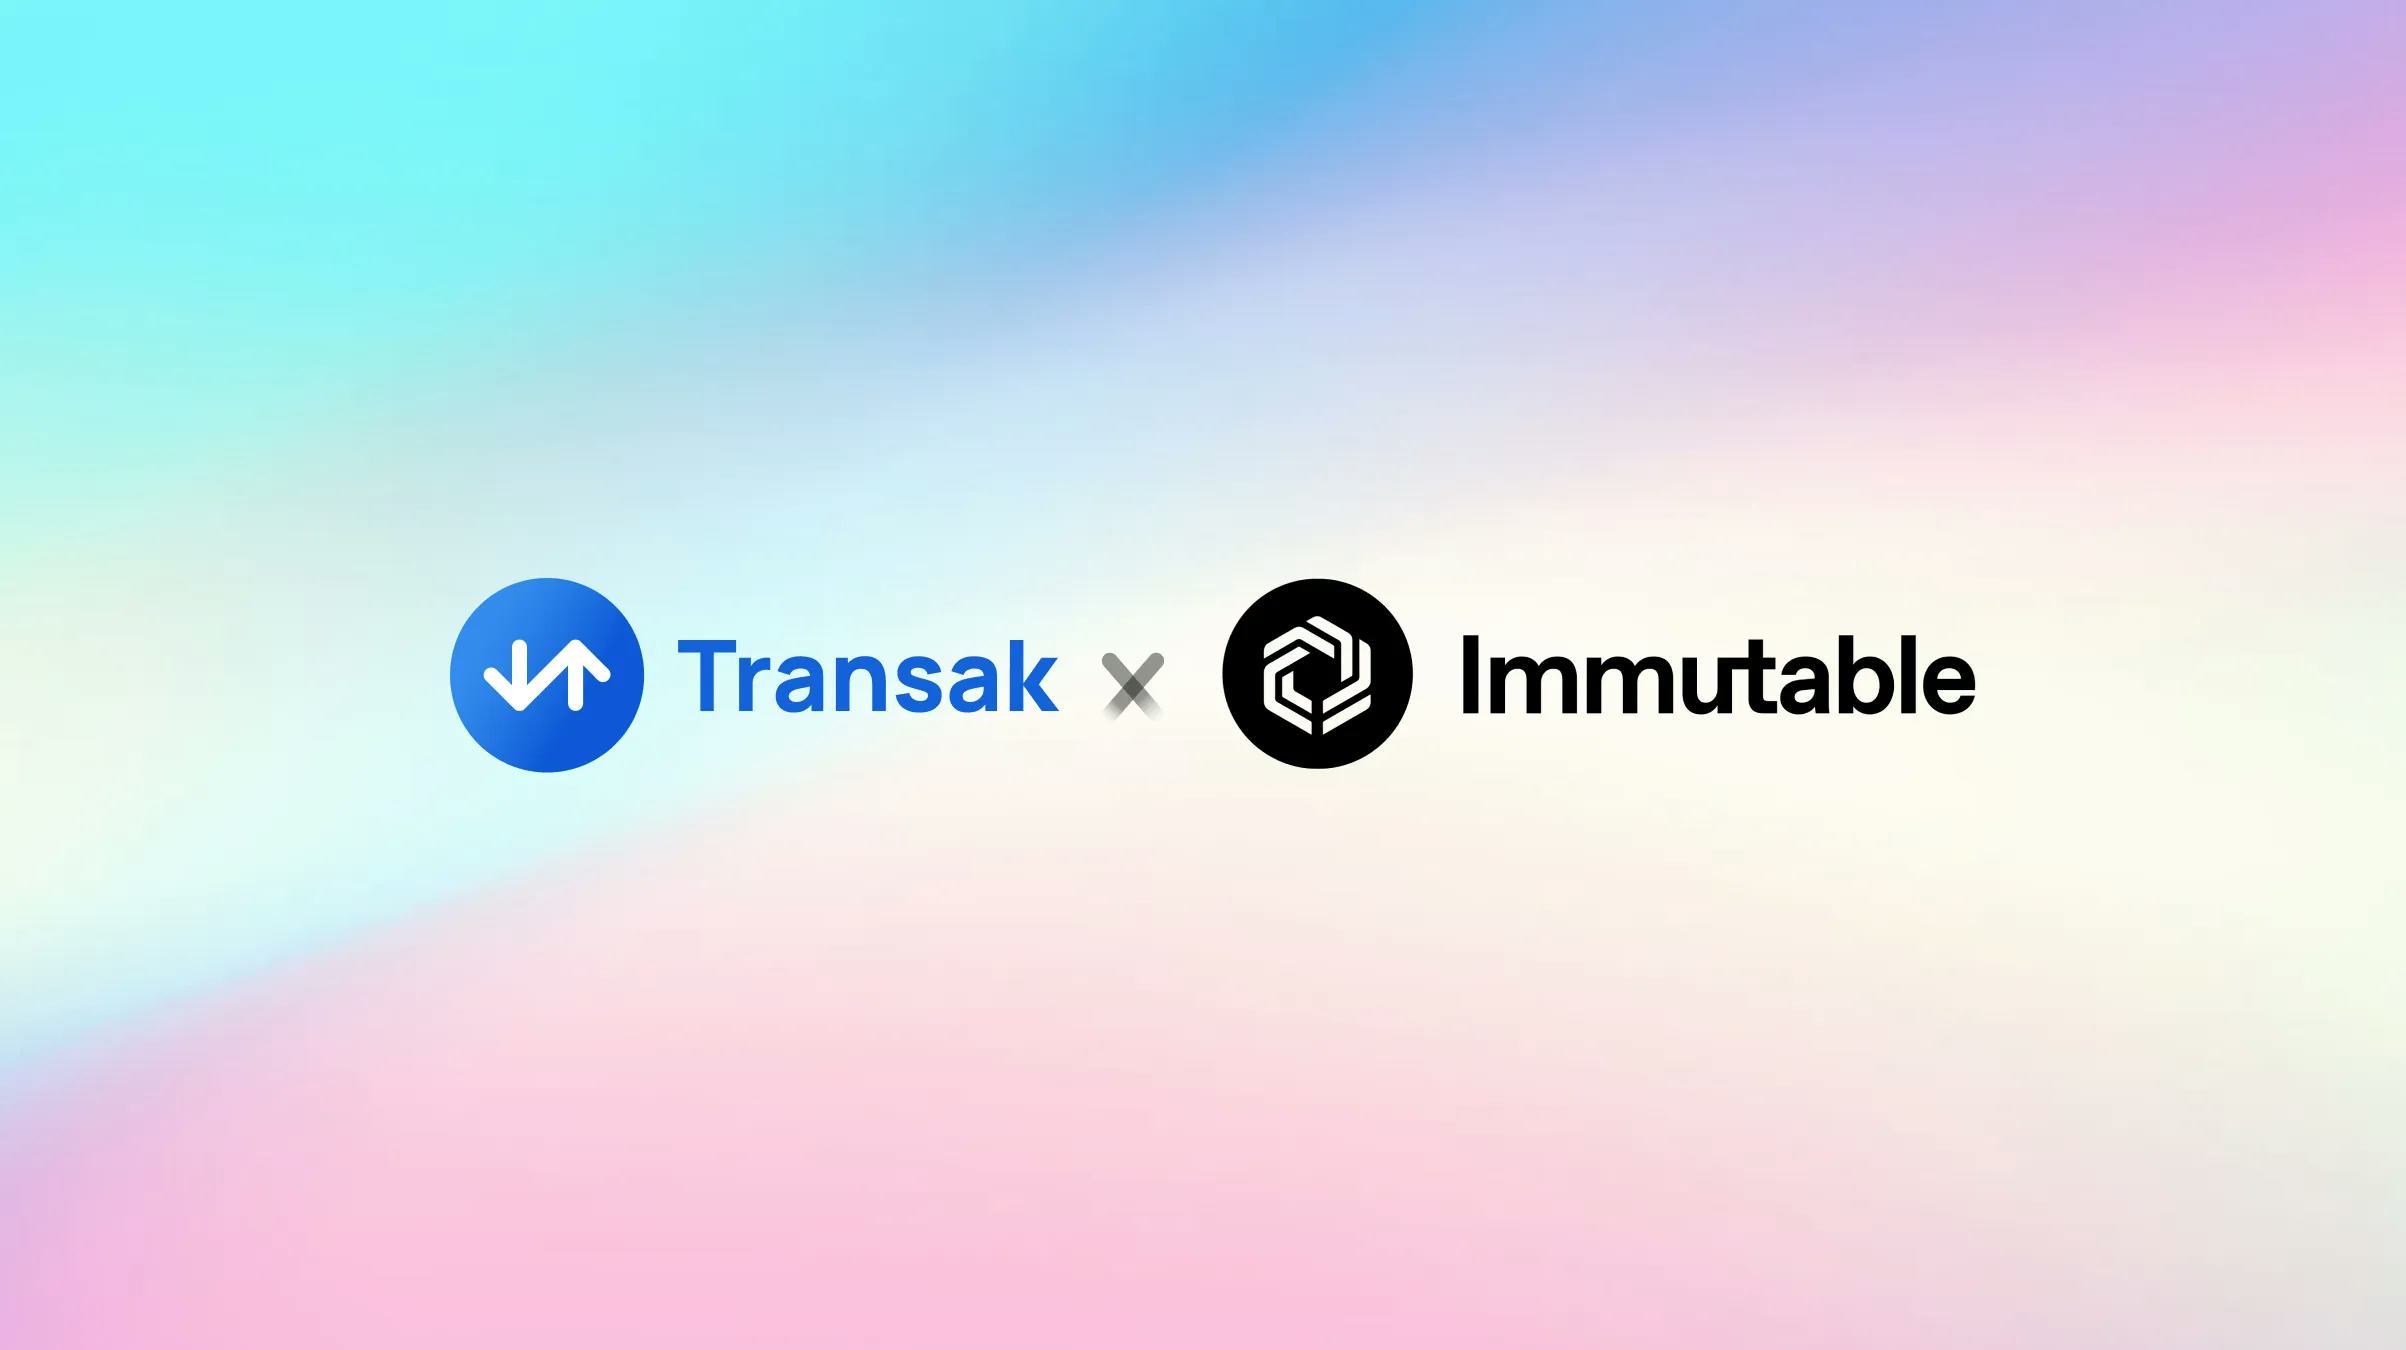 Immutable Partners with Transak to Bring Frictionless Payments to Games